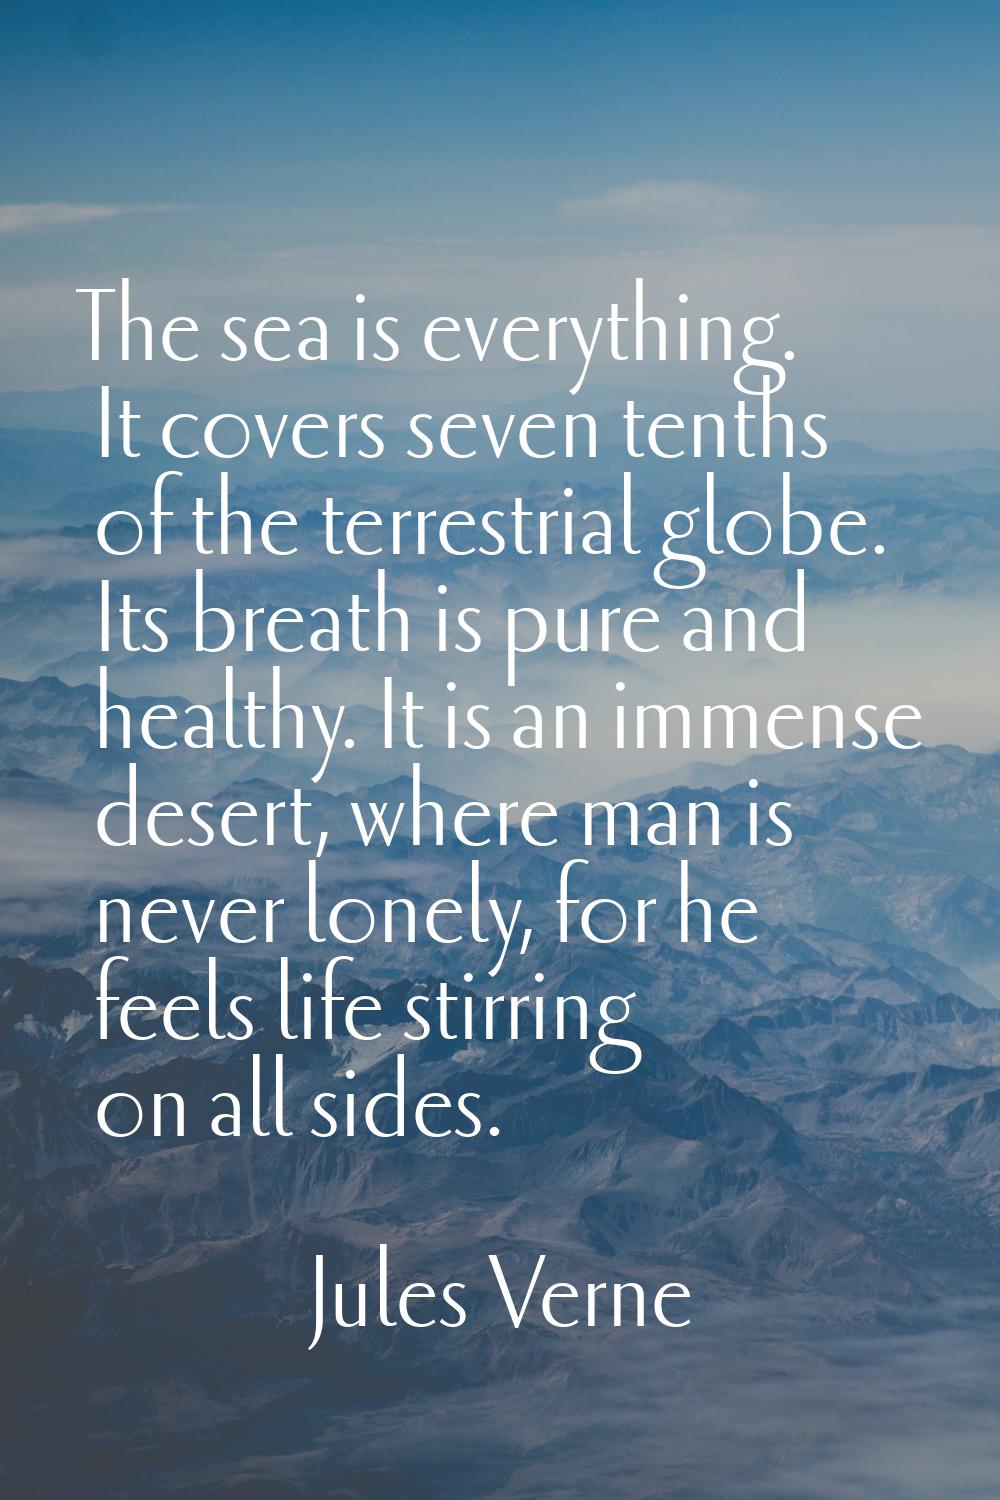 The sea is everything. It covers seven tenths of the terrestrial globe. Its breath is pure and heal